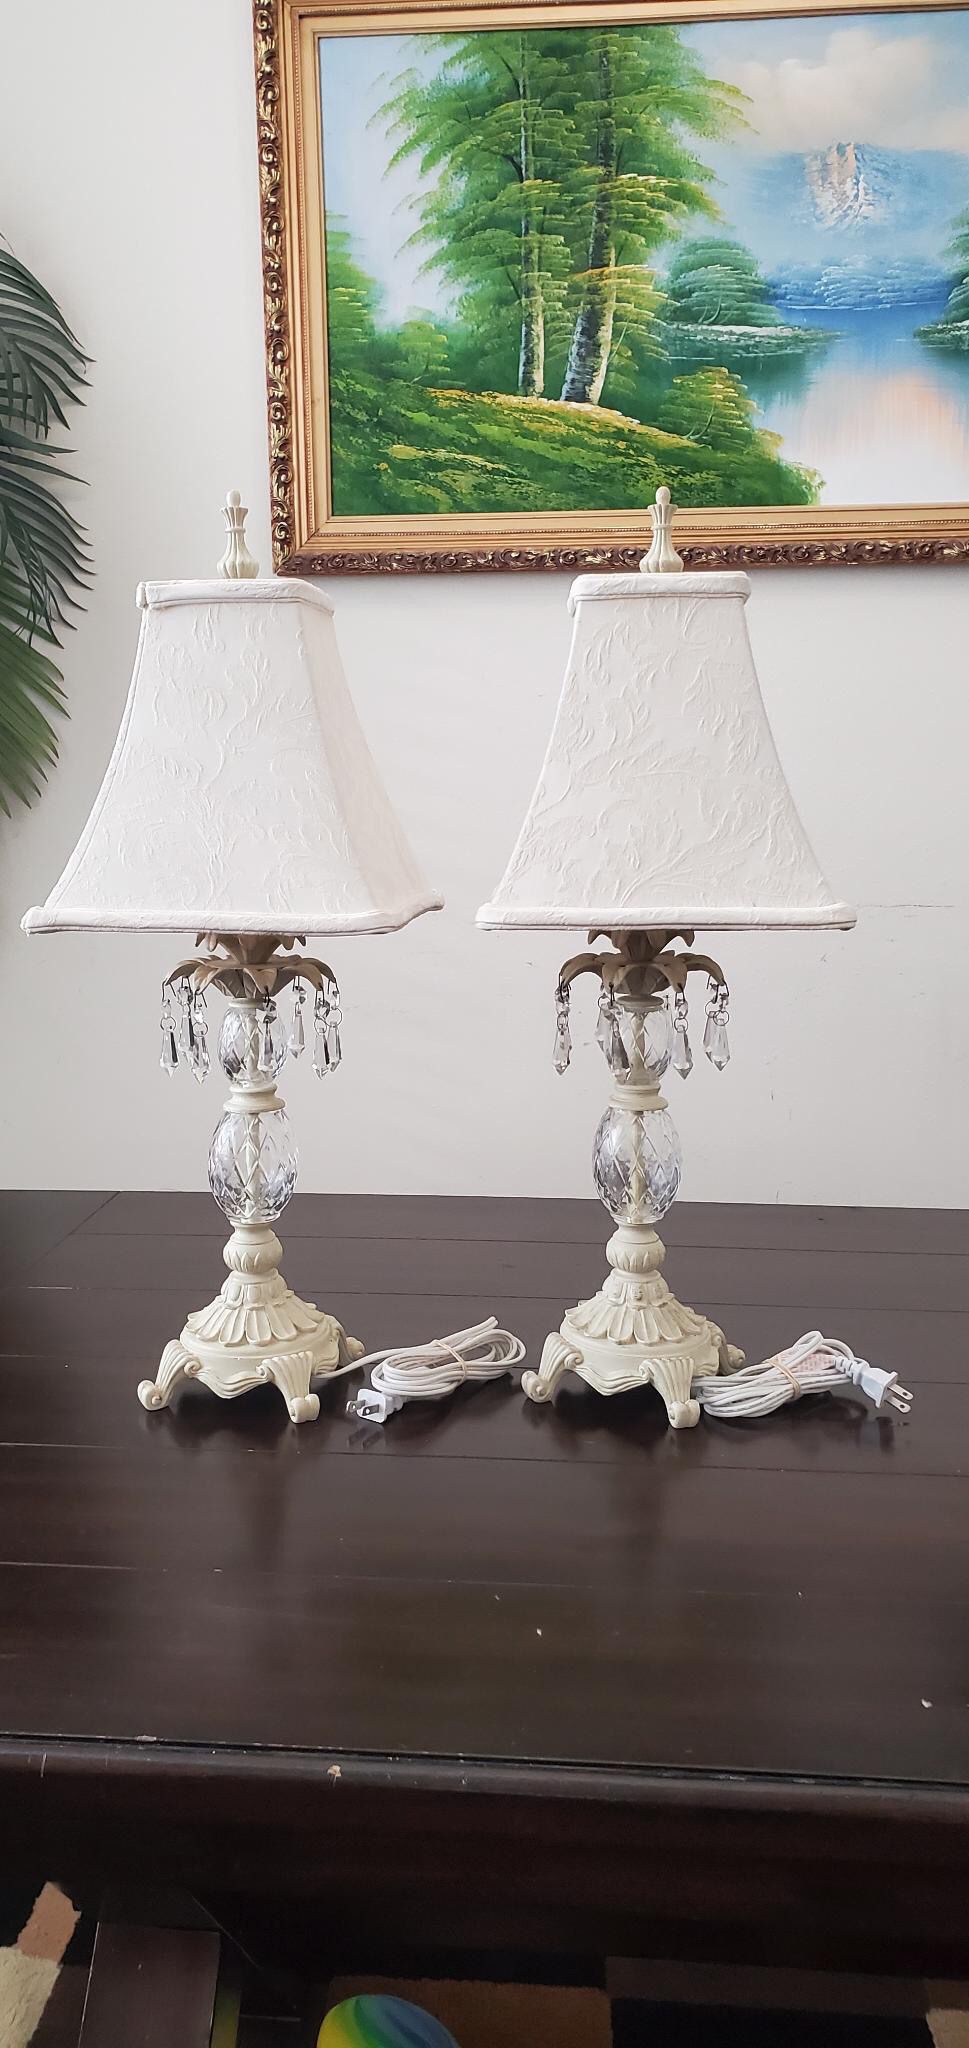 2 White antique table lamps with hanging crystals